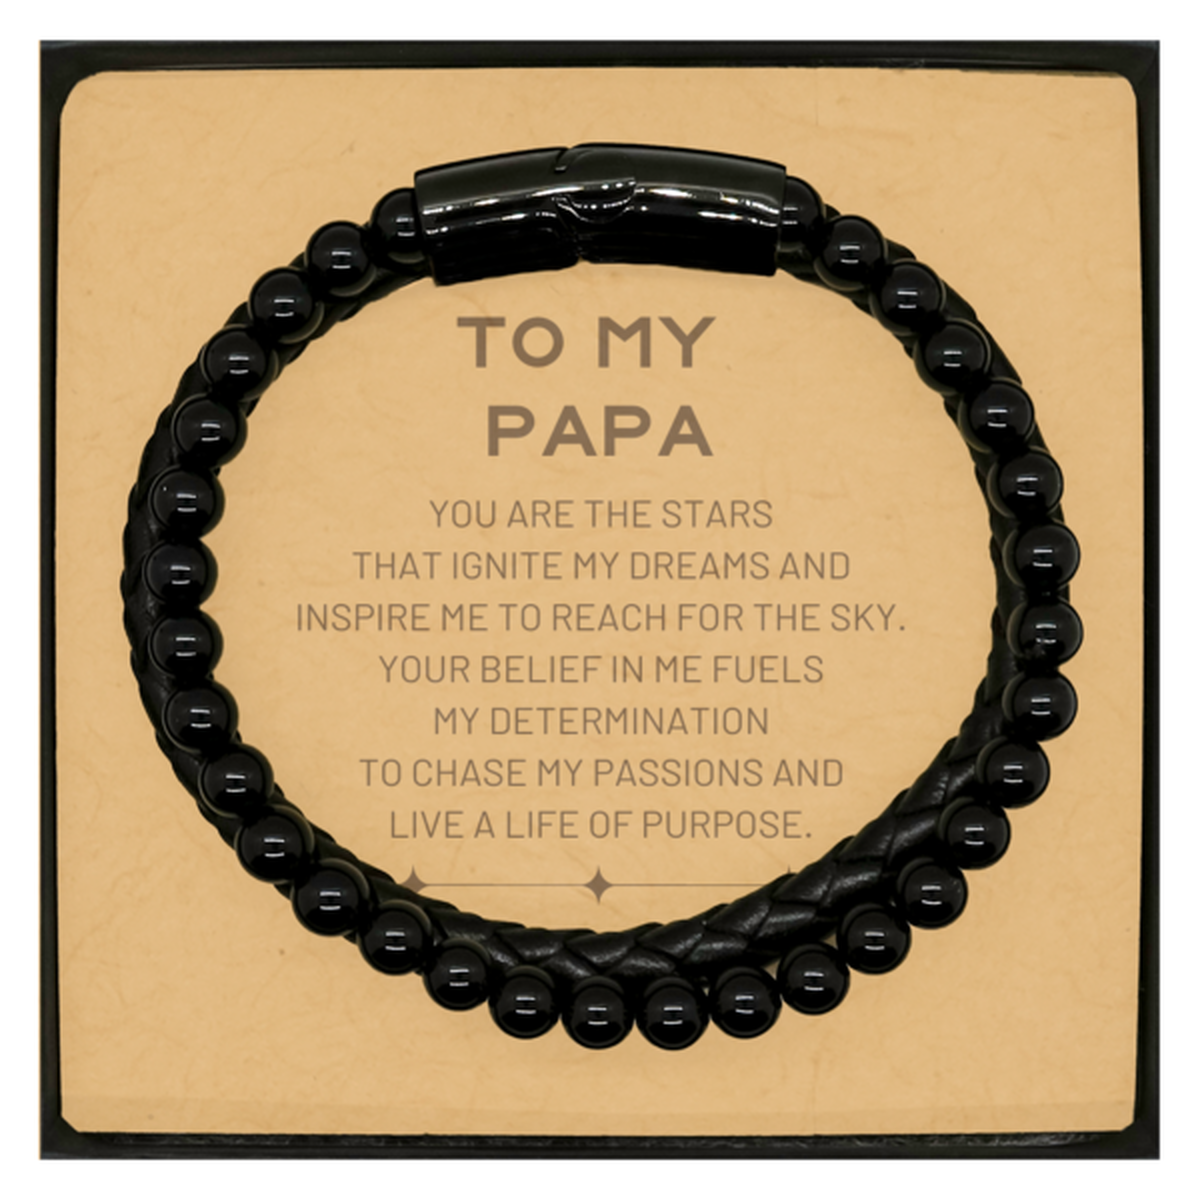 To My Papa Stone Leather Bracelets, You are the stars that ignite my dreams and inspire me to reach for the sky, Birthday Christmas Unique Gifts For Papa, Thank You Gifts For Papa